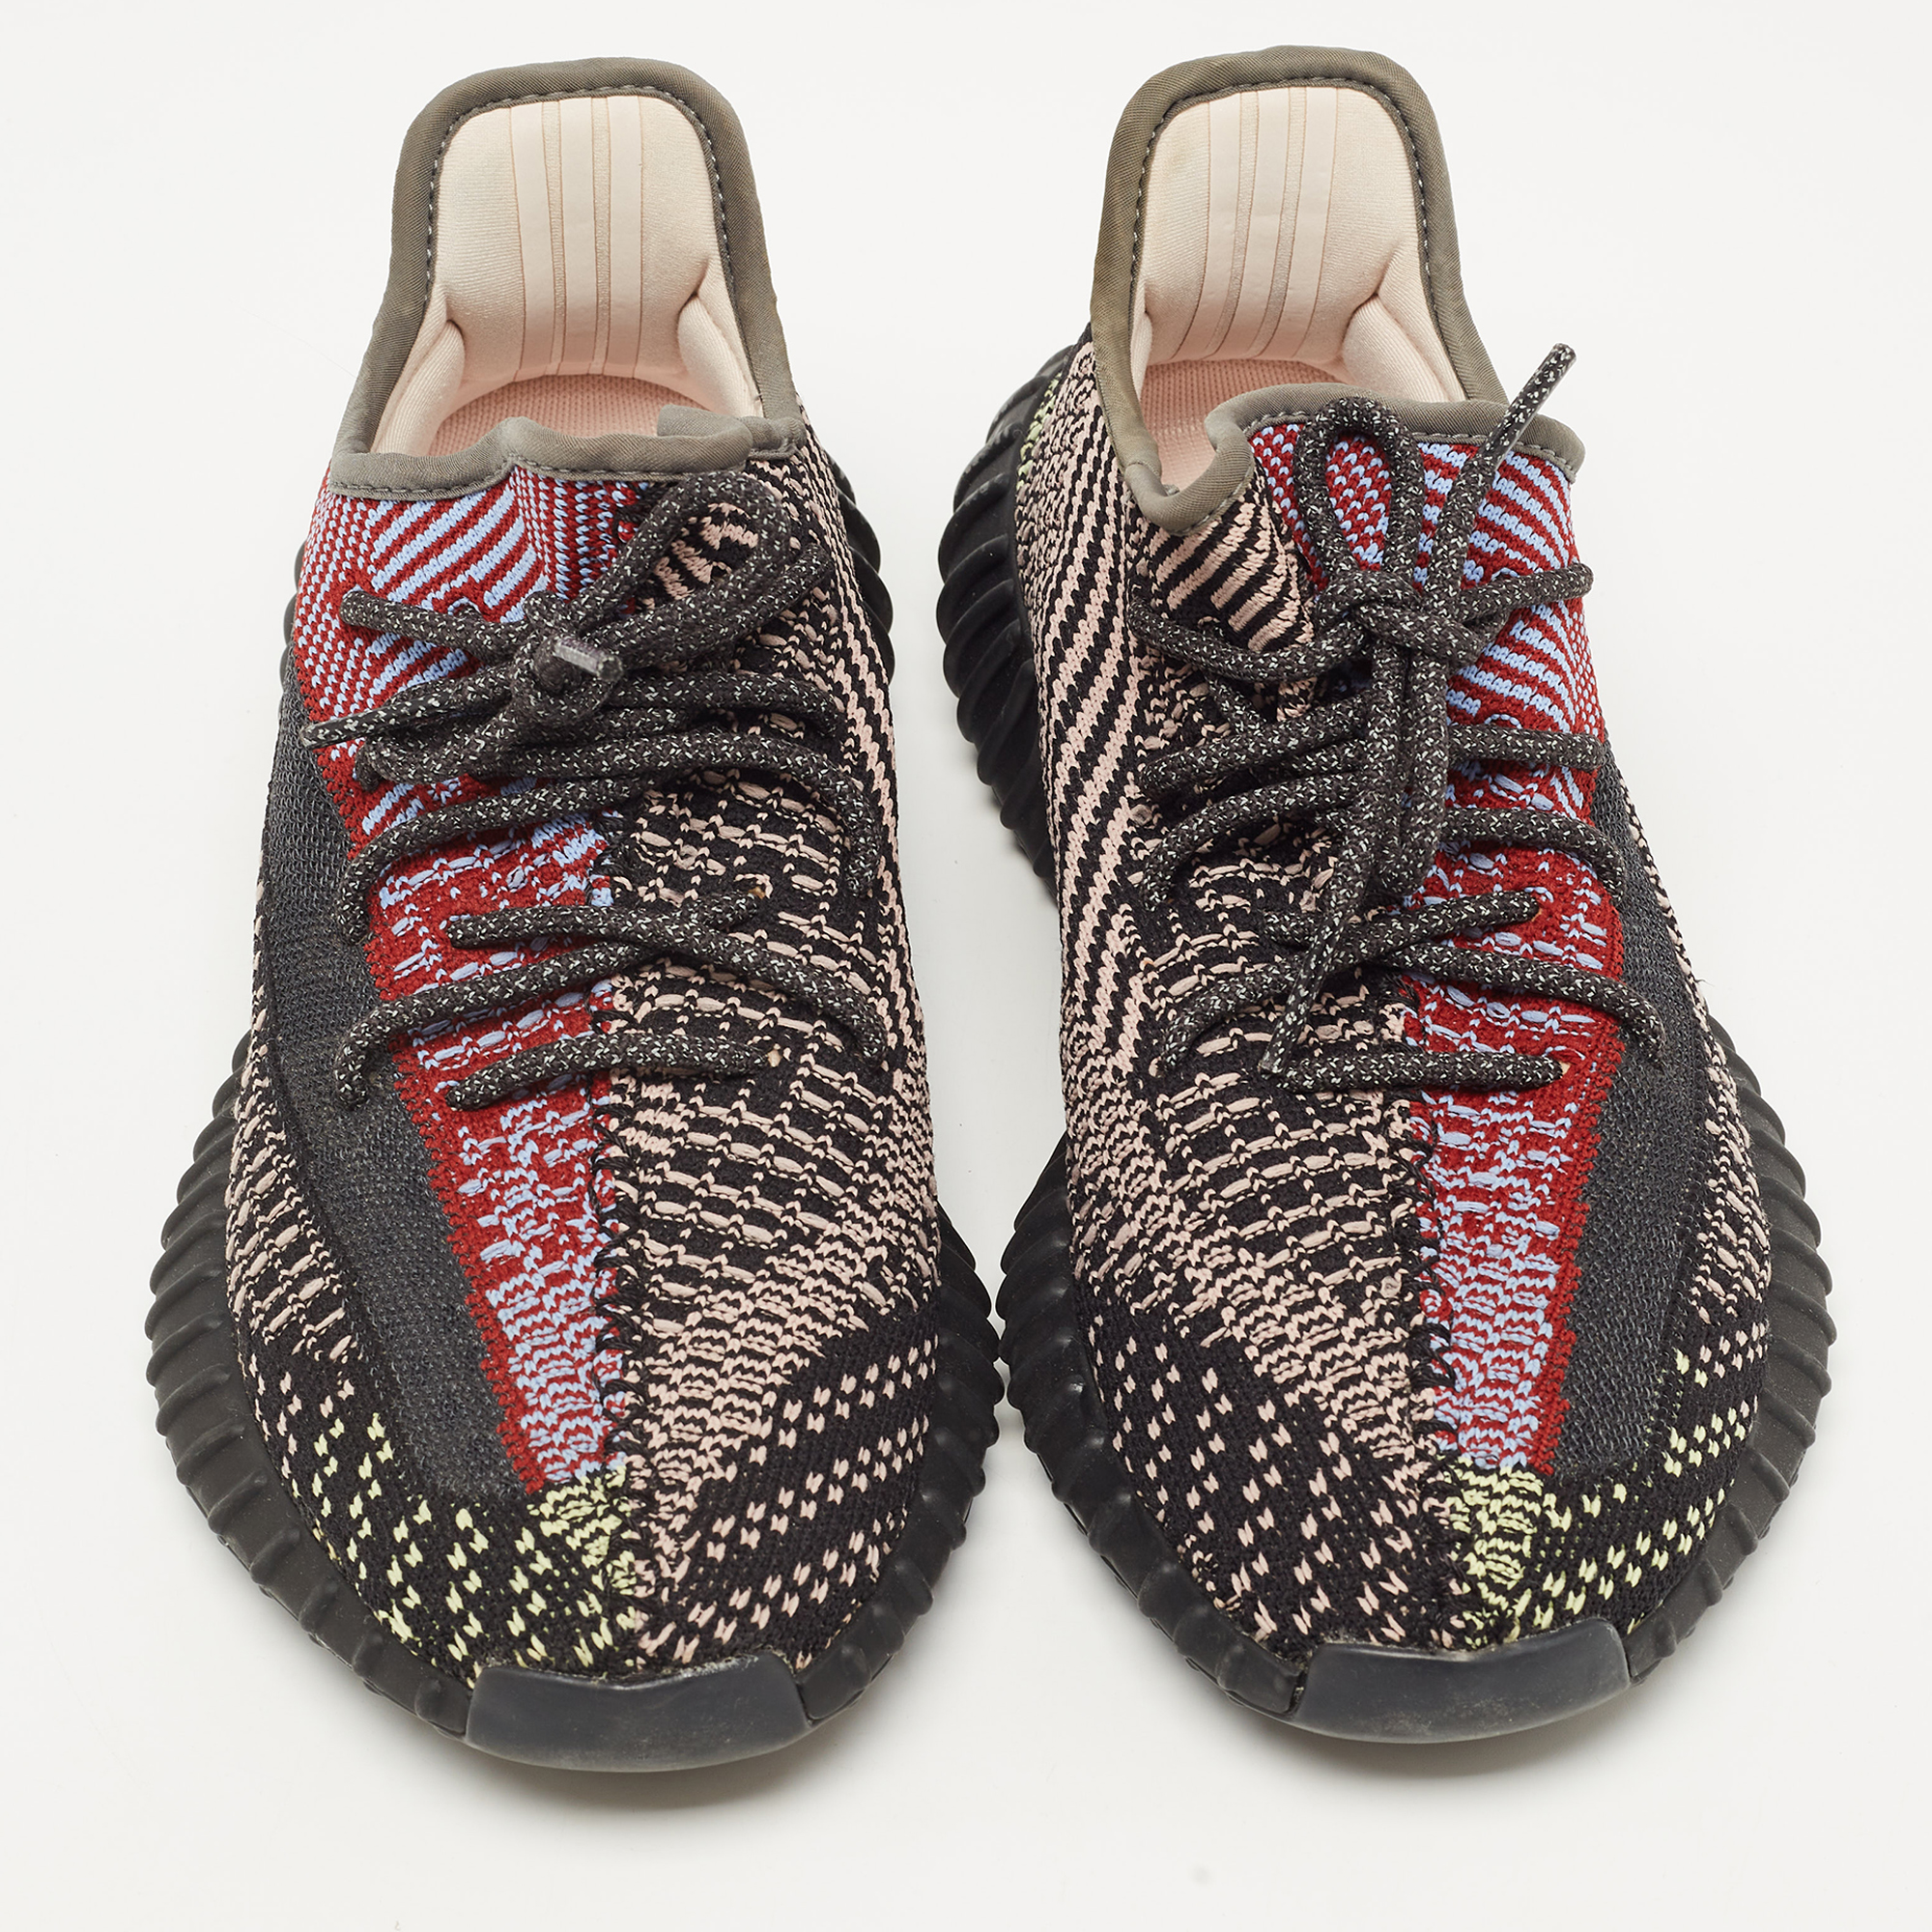 Yeezy X Adidas Multicolor Knit Fabric  Boost 350 V2 Yecheil (Non-Reflective) Sneakers Size 42